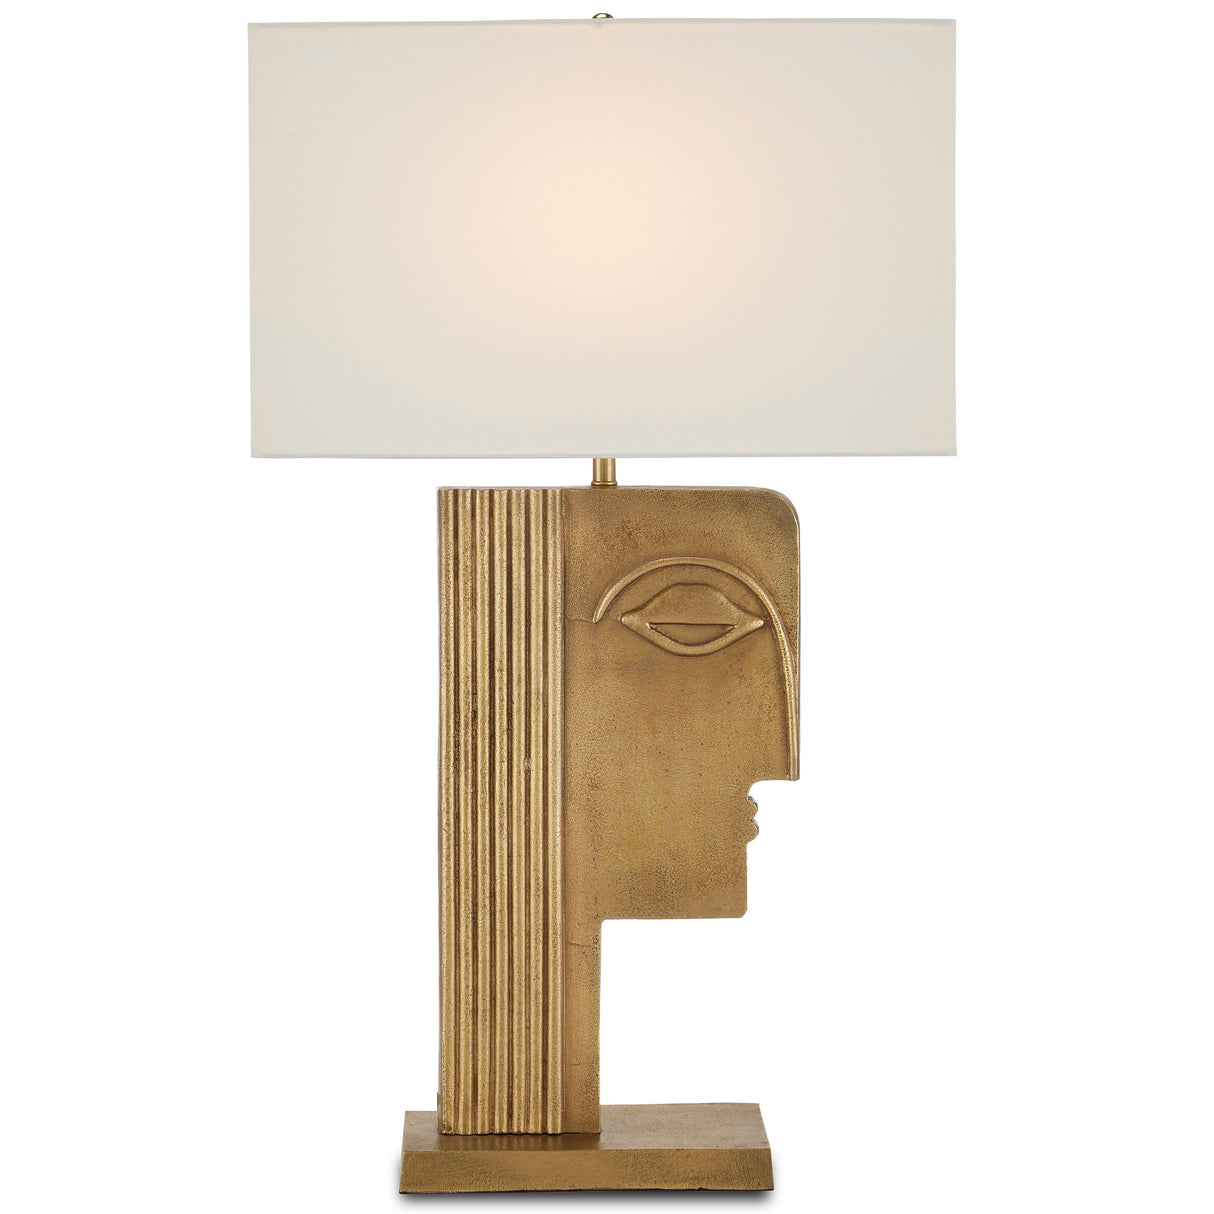 Currey & Company Thebes Table Lamp Lighting currey-co-6000-0859